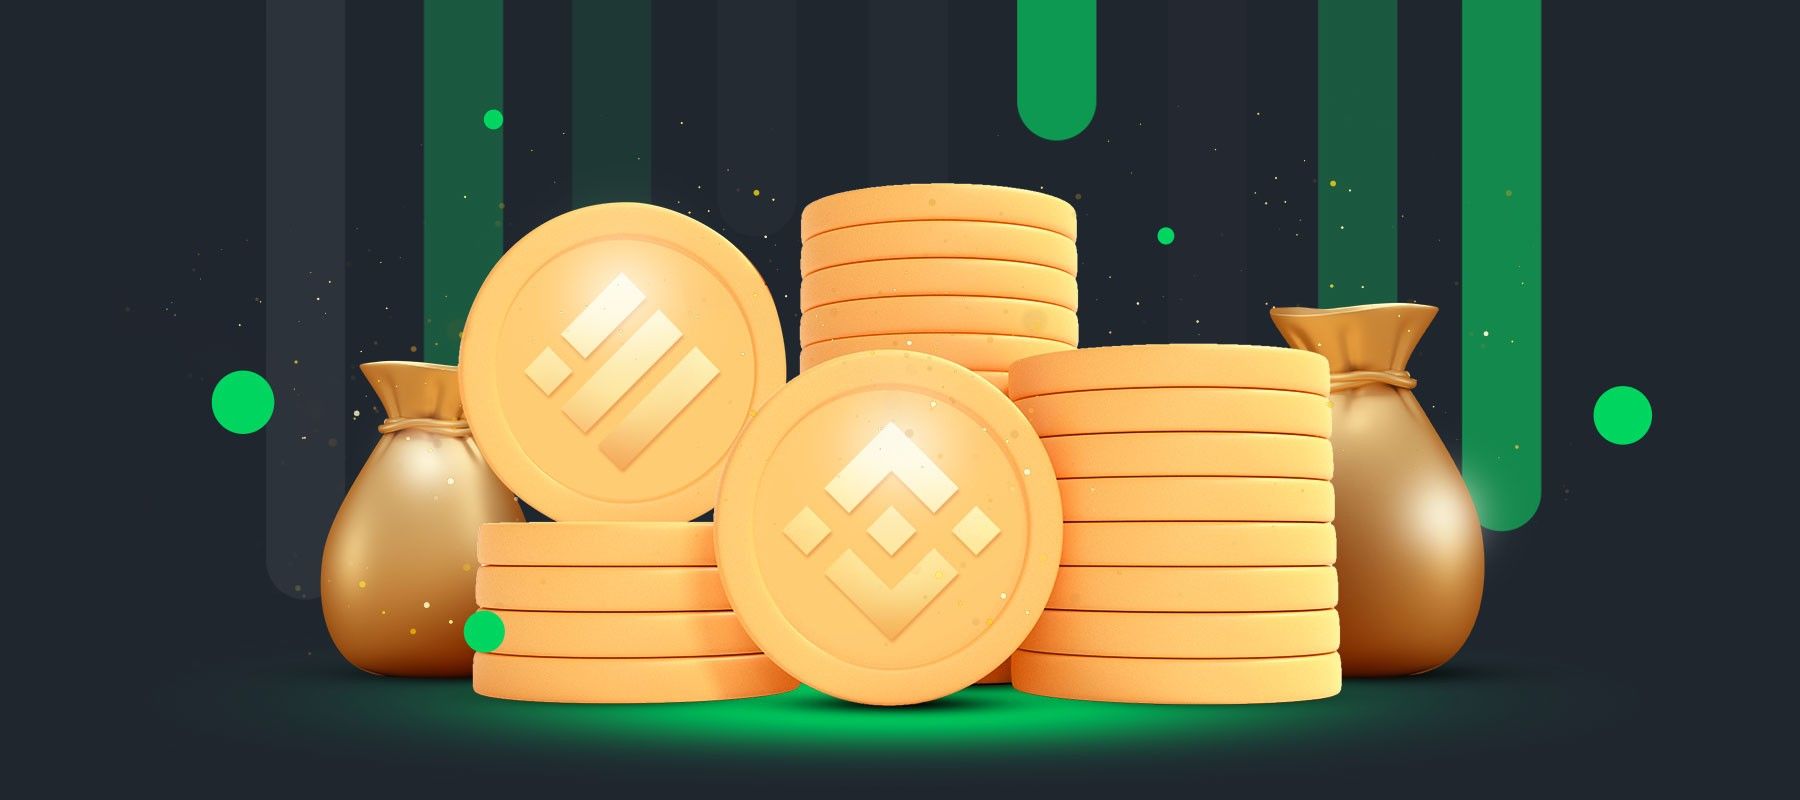 BNB and BUSD – your crypto options are growing!